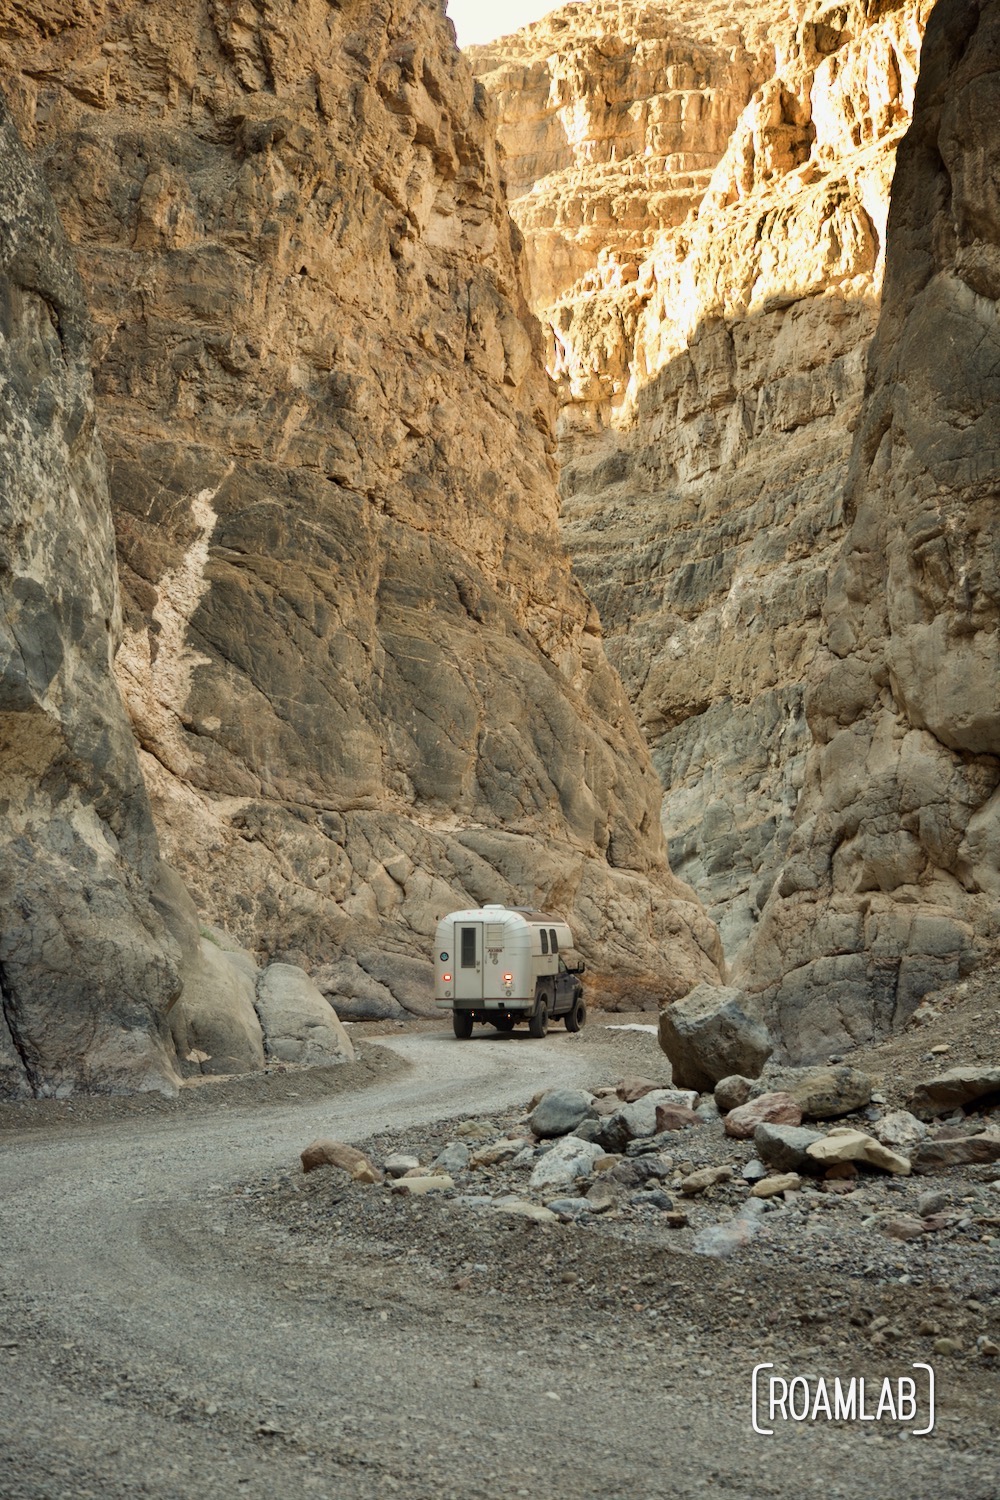 1970 Avion C11 truck camper driving through a slot canyon, following the dirt Titus Canyon Road in Death Valley National Park, California.